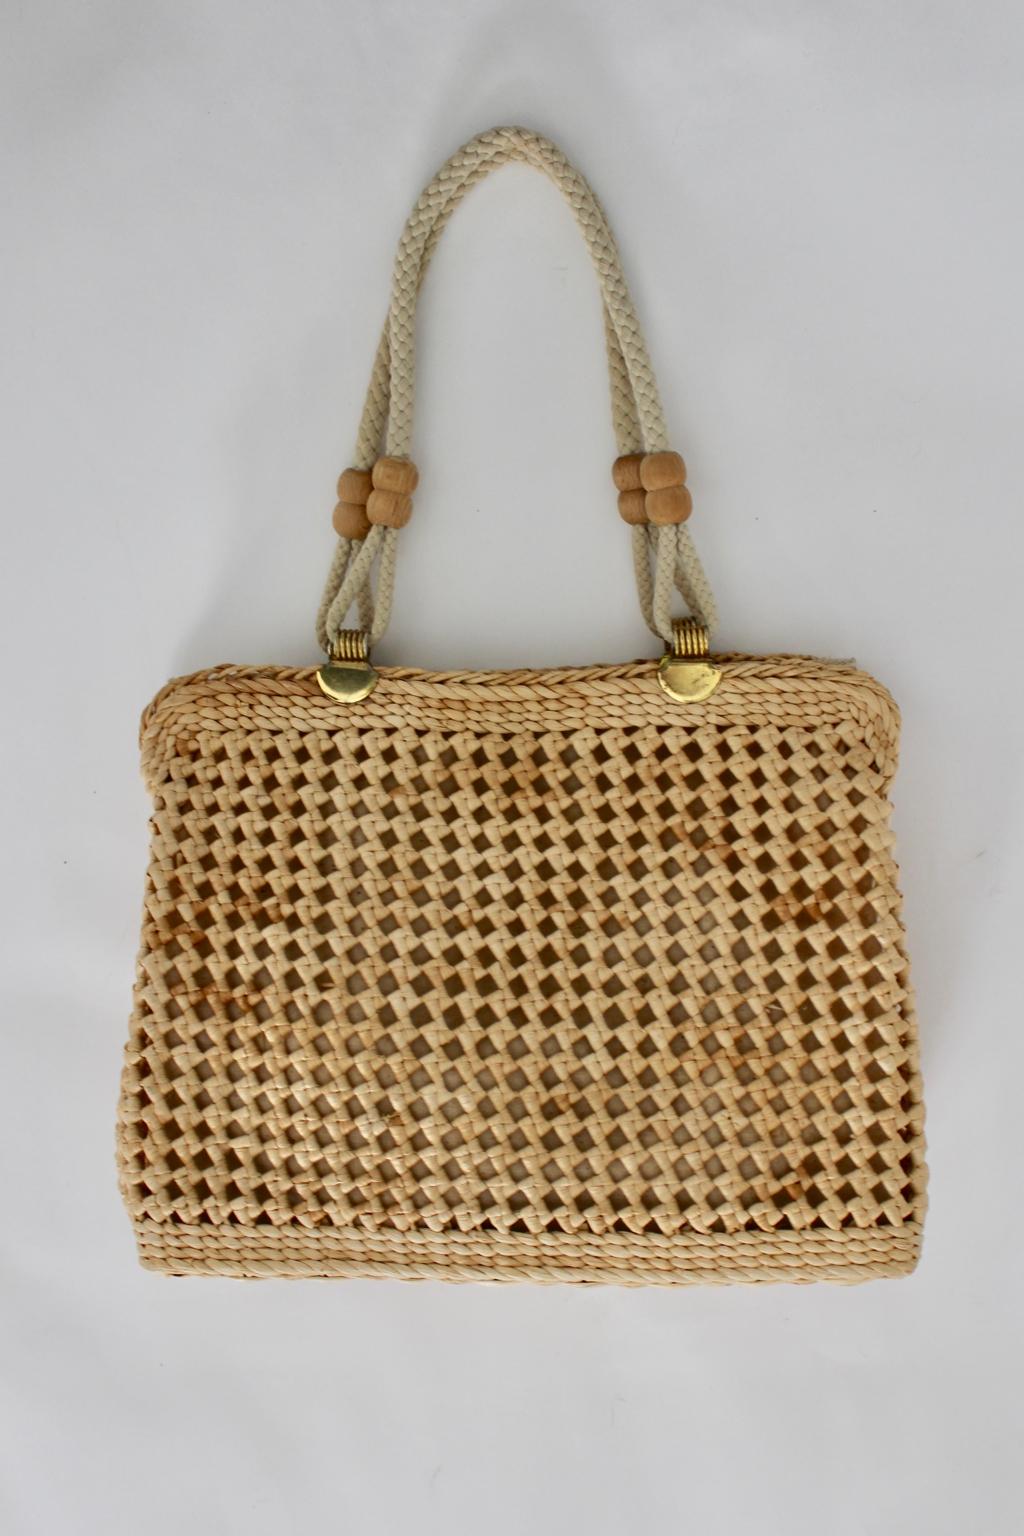 We present a charming Vintage Straw Shoulder Bag with decorating wooden balls and brass details.
The straw bag features cords to carry the bag over the shoulder or as handle bag furthermore the bag features an off white canvas inlay with one side